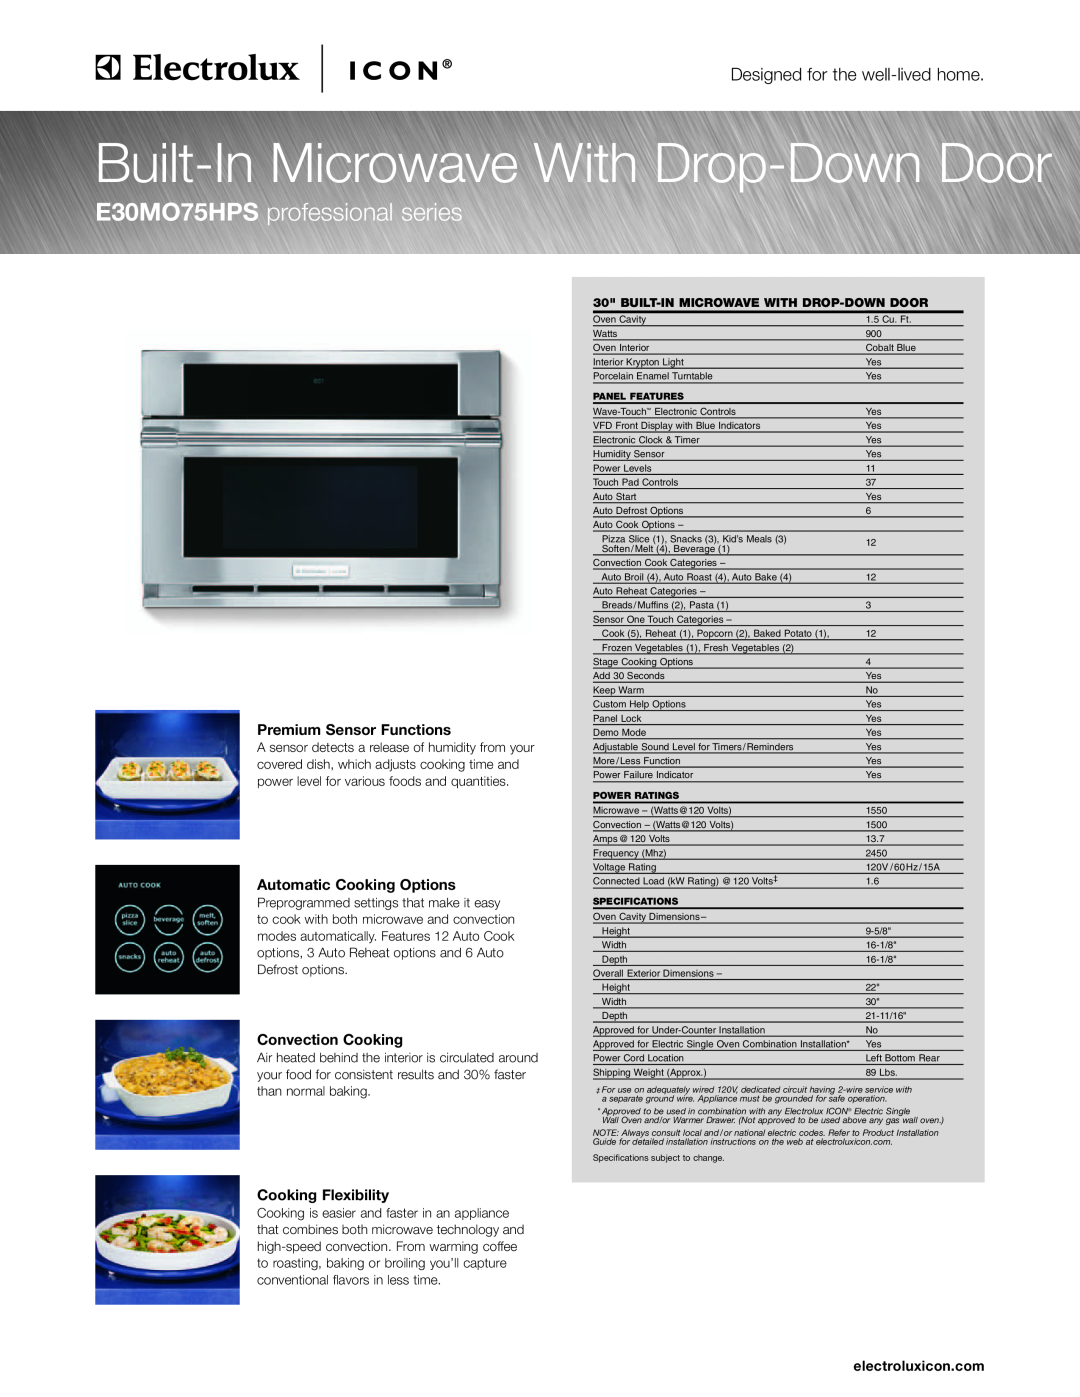 Electrolux specifications E30MO75HPS professional series, Premium Sensor Functions, Automatic Cooking Options 